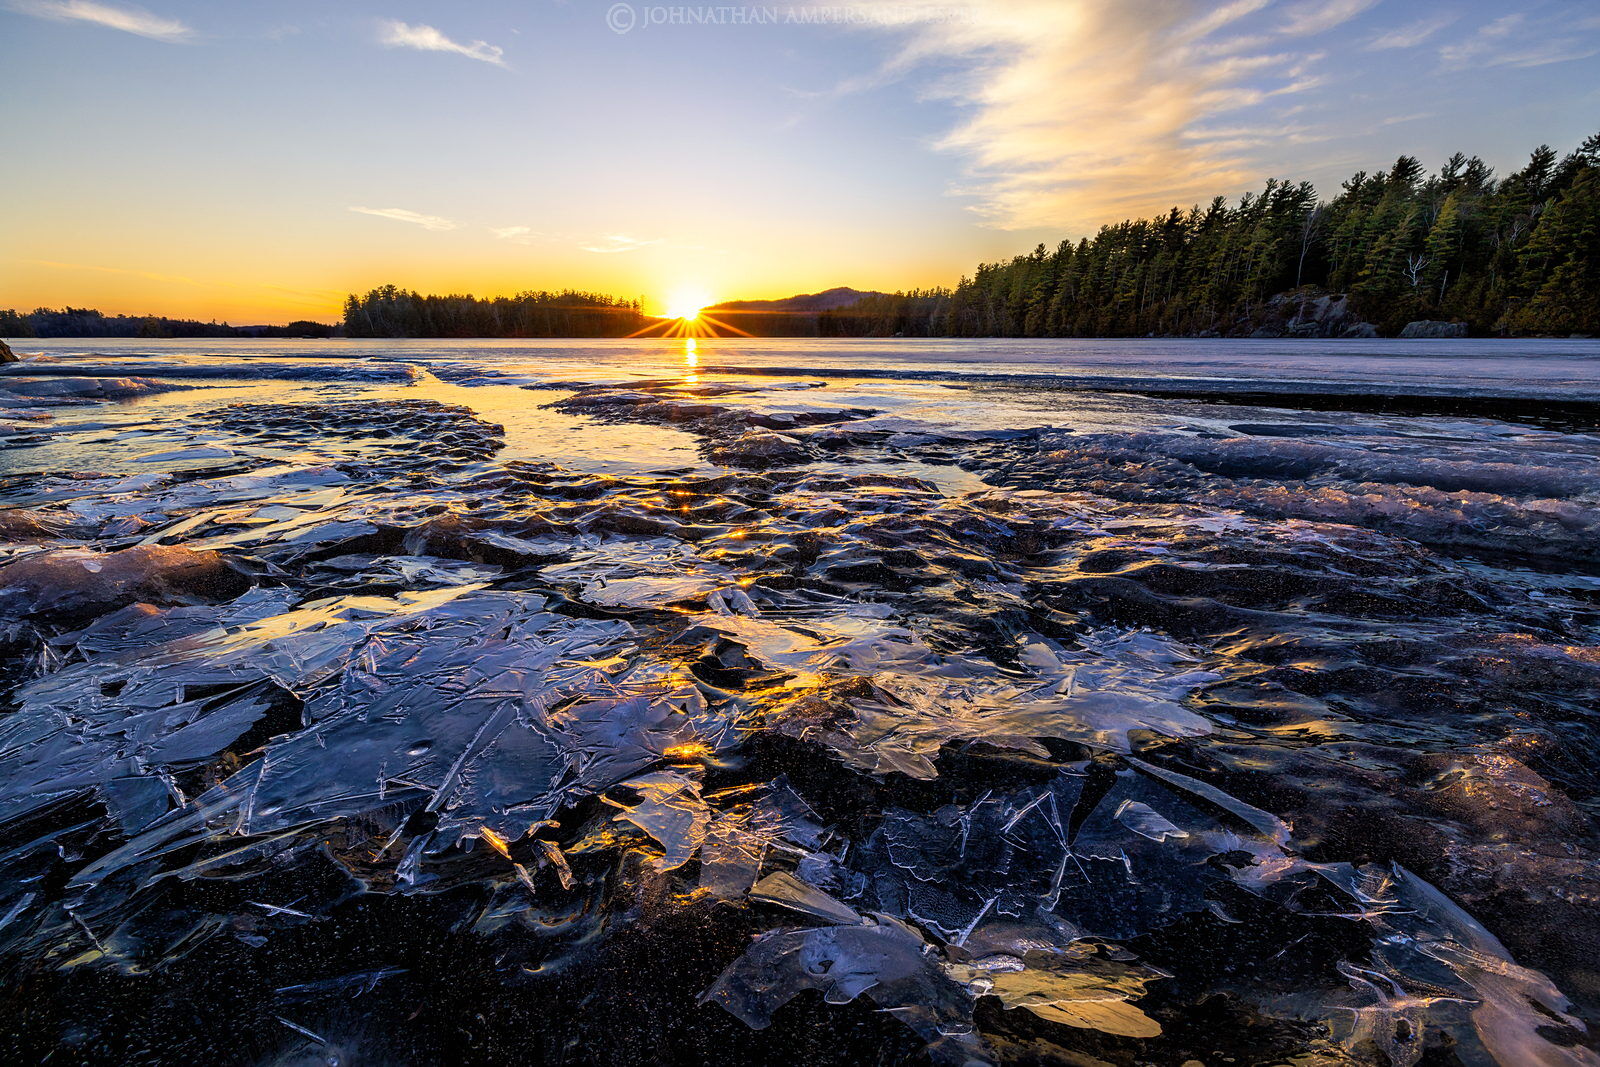 Lower Saranac Lake,Saranac Lakes,Saranac Lake,spring,spring ice,golden ice,backlit ice,ice,cystals,ice crystals,March,2022,Saranac...